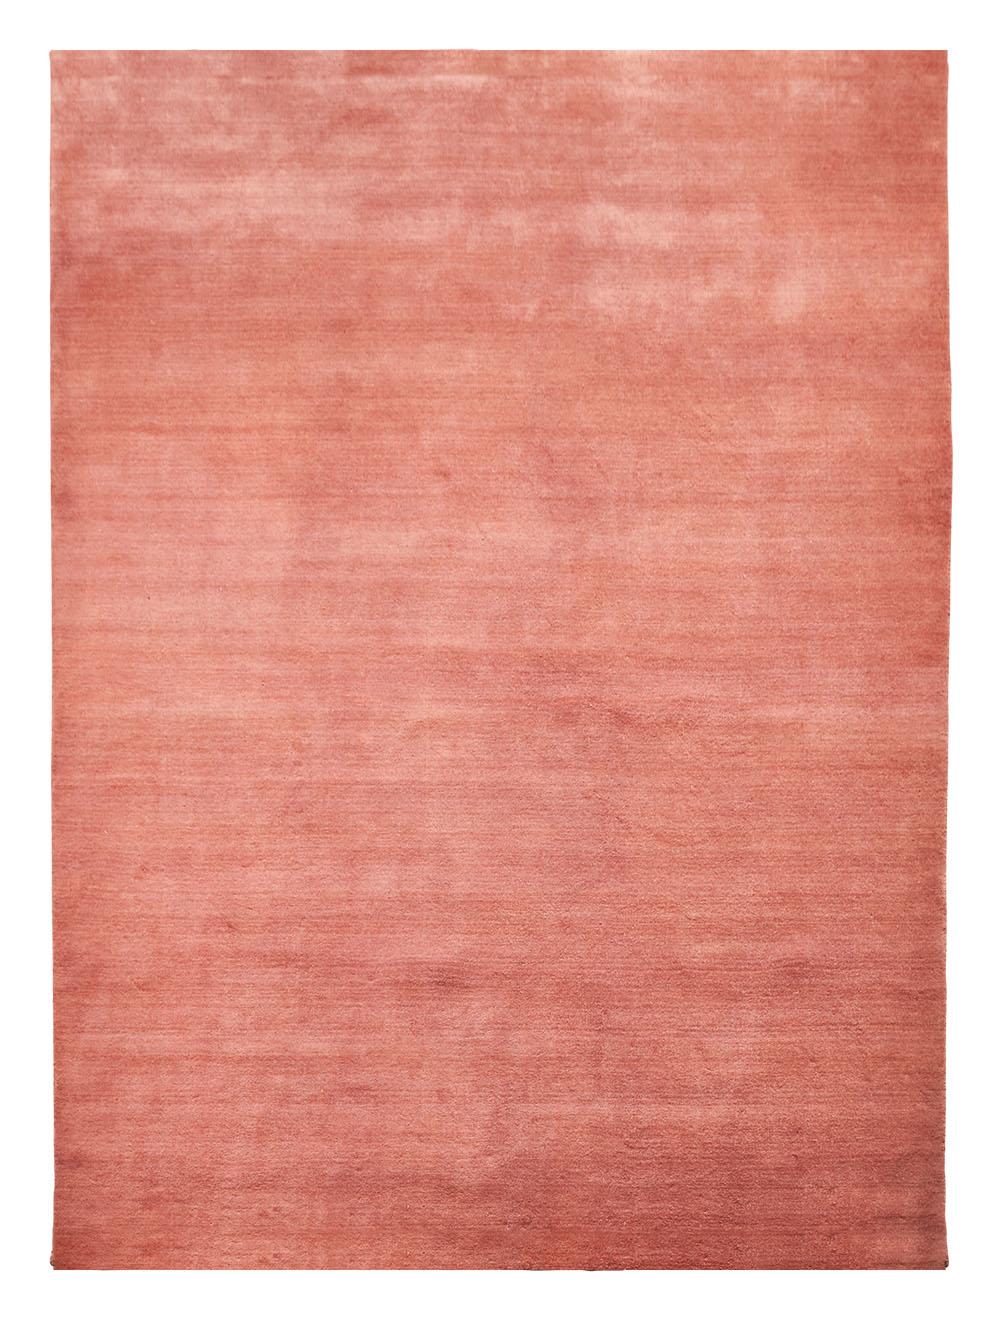 Terra Cotta Earth Bamboo Carpet by Massimo Copenhagen
Handwoven
Materials: 50% New Zealand Wool, 50% Bamboo
Dimensions: W 300 x H 400 cm
Available colors: Nougat Rose, Cashmere, Soft Grey, Concrete, Warm Grey, Mustard Yellow, Vibrant Blue,